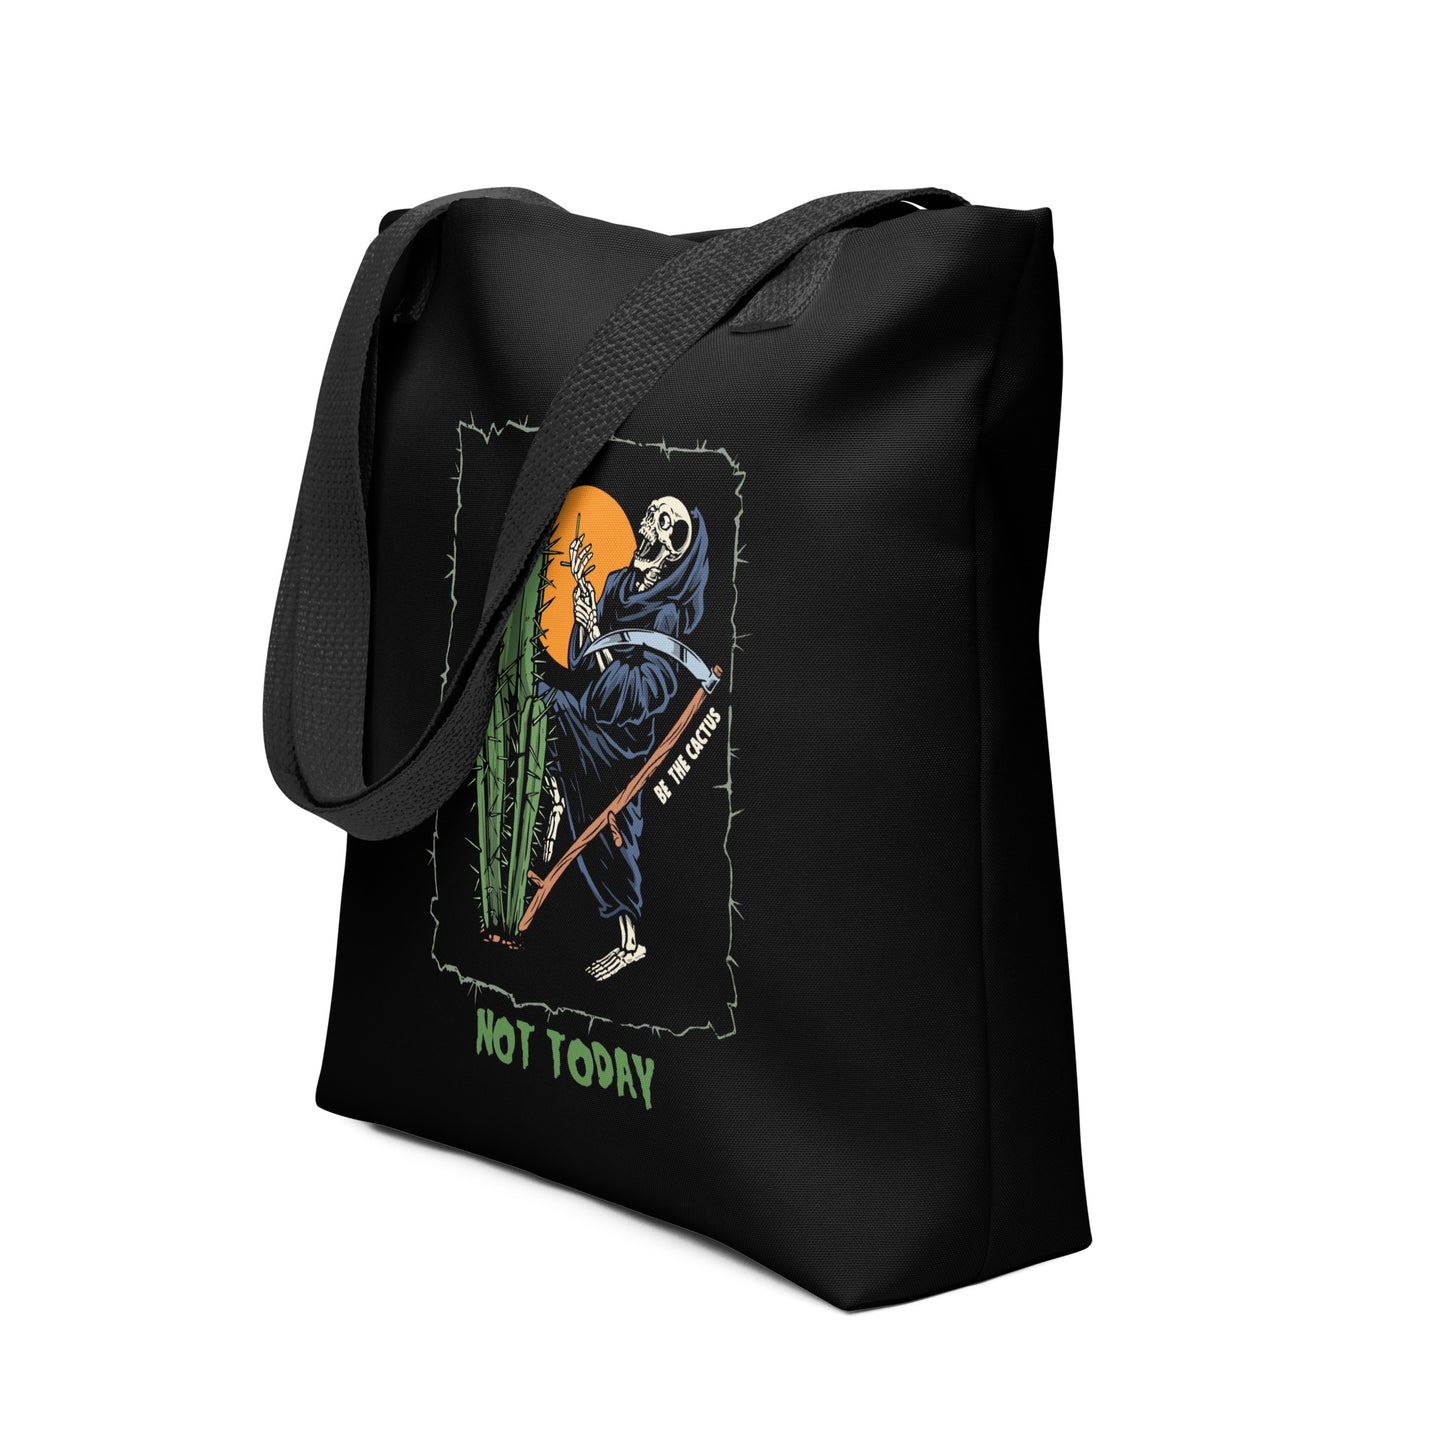 Not Today, Death Tote bag